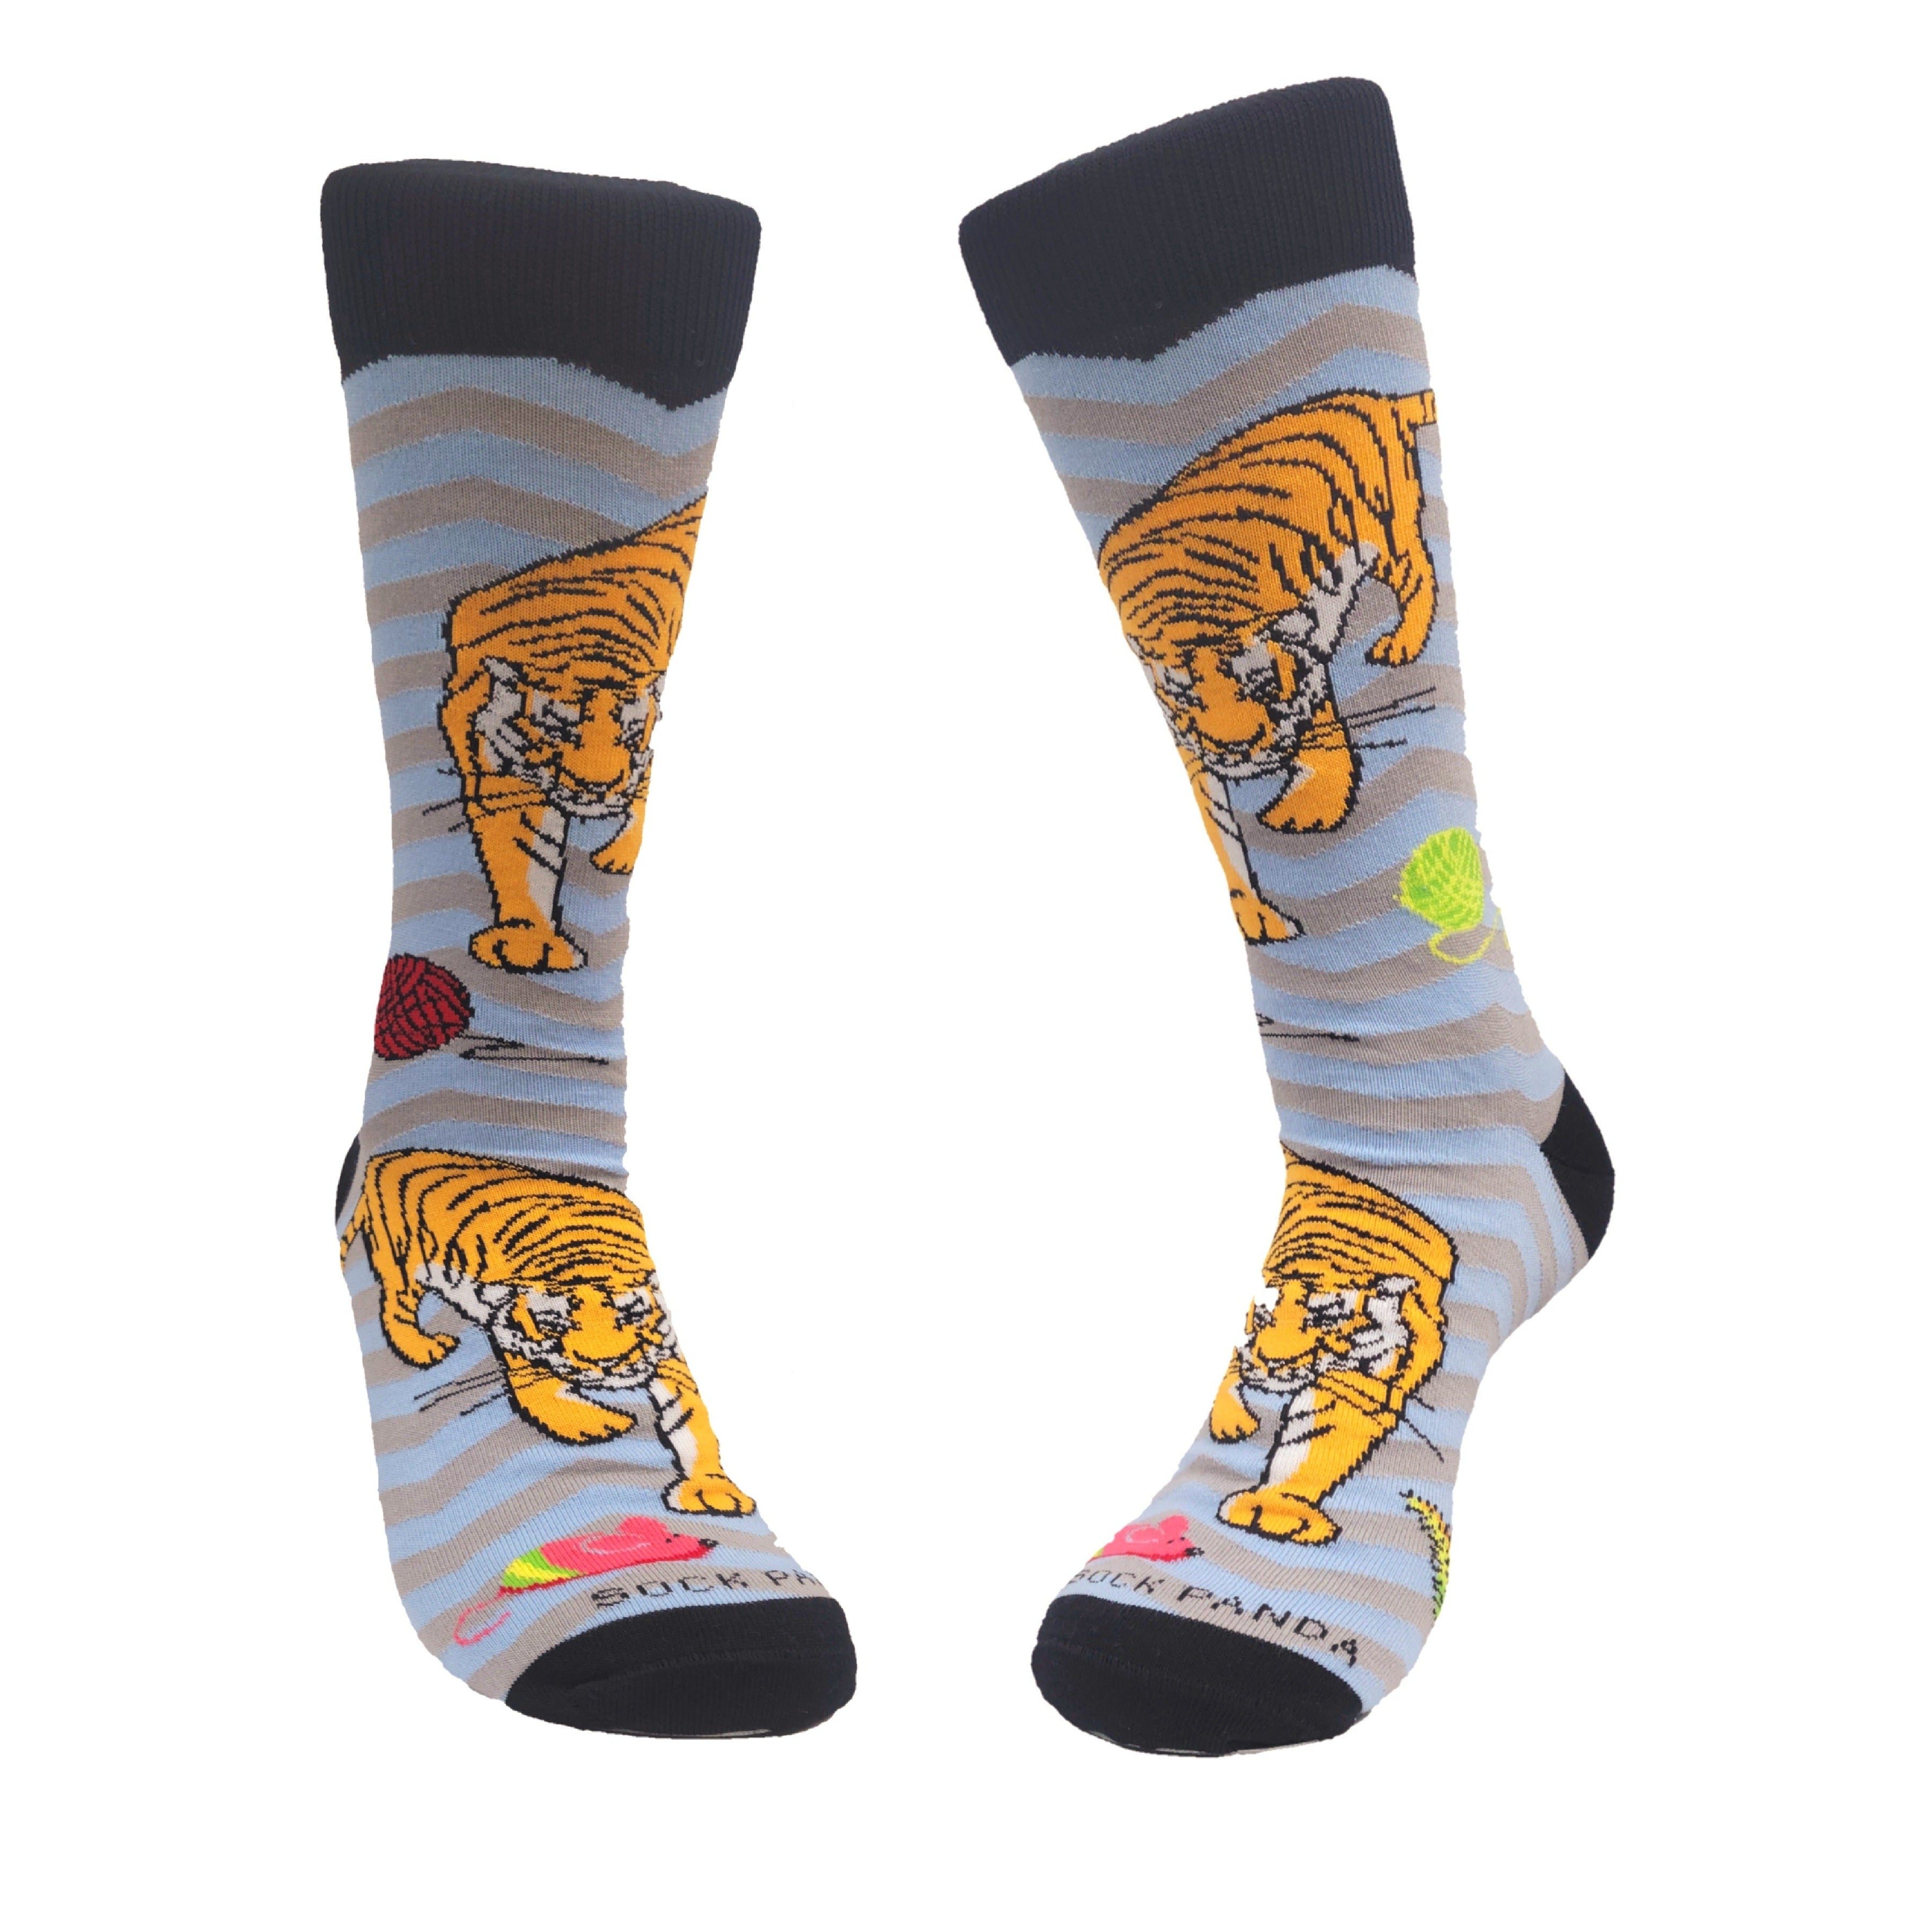 Tiger Playing with Toys Socks from the Sock Panda (Adult Large)